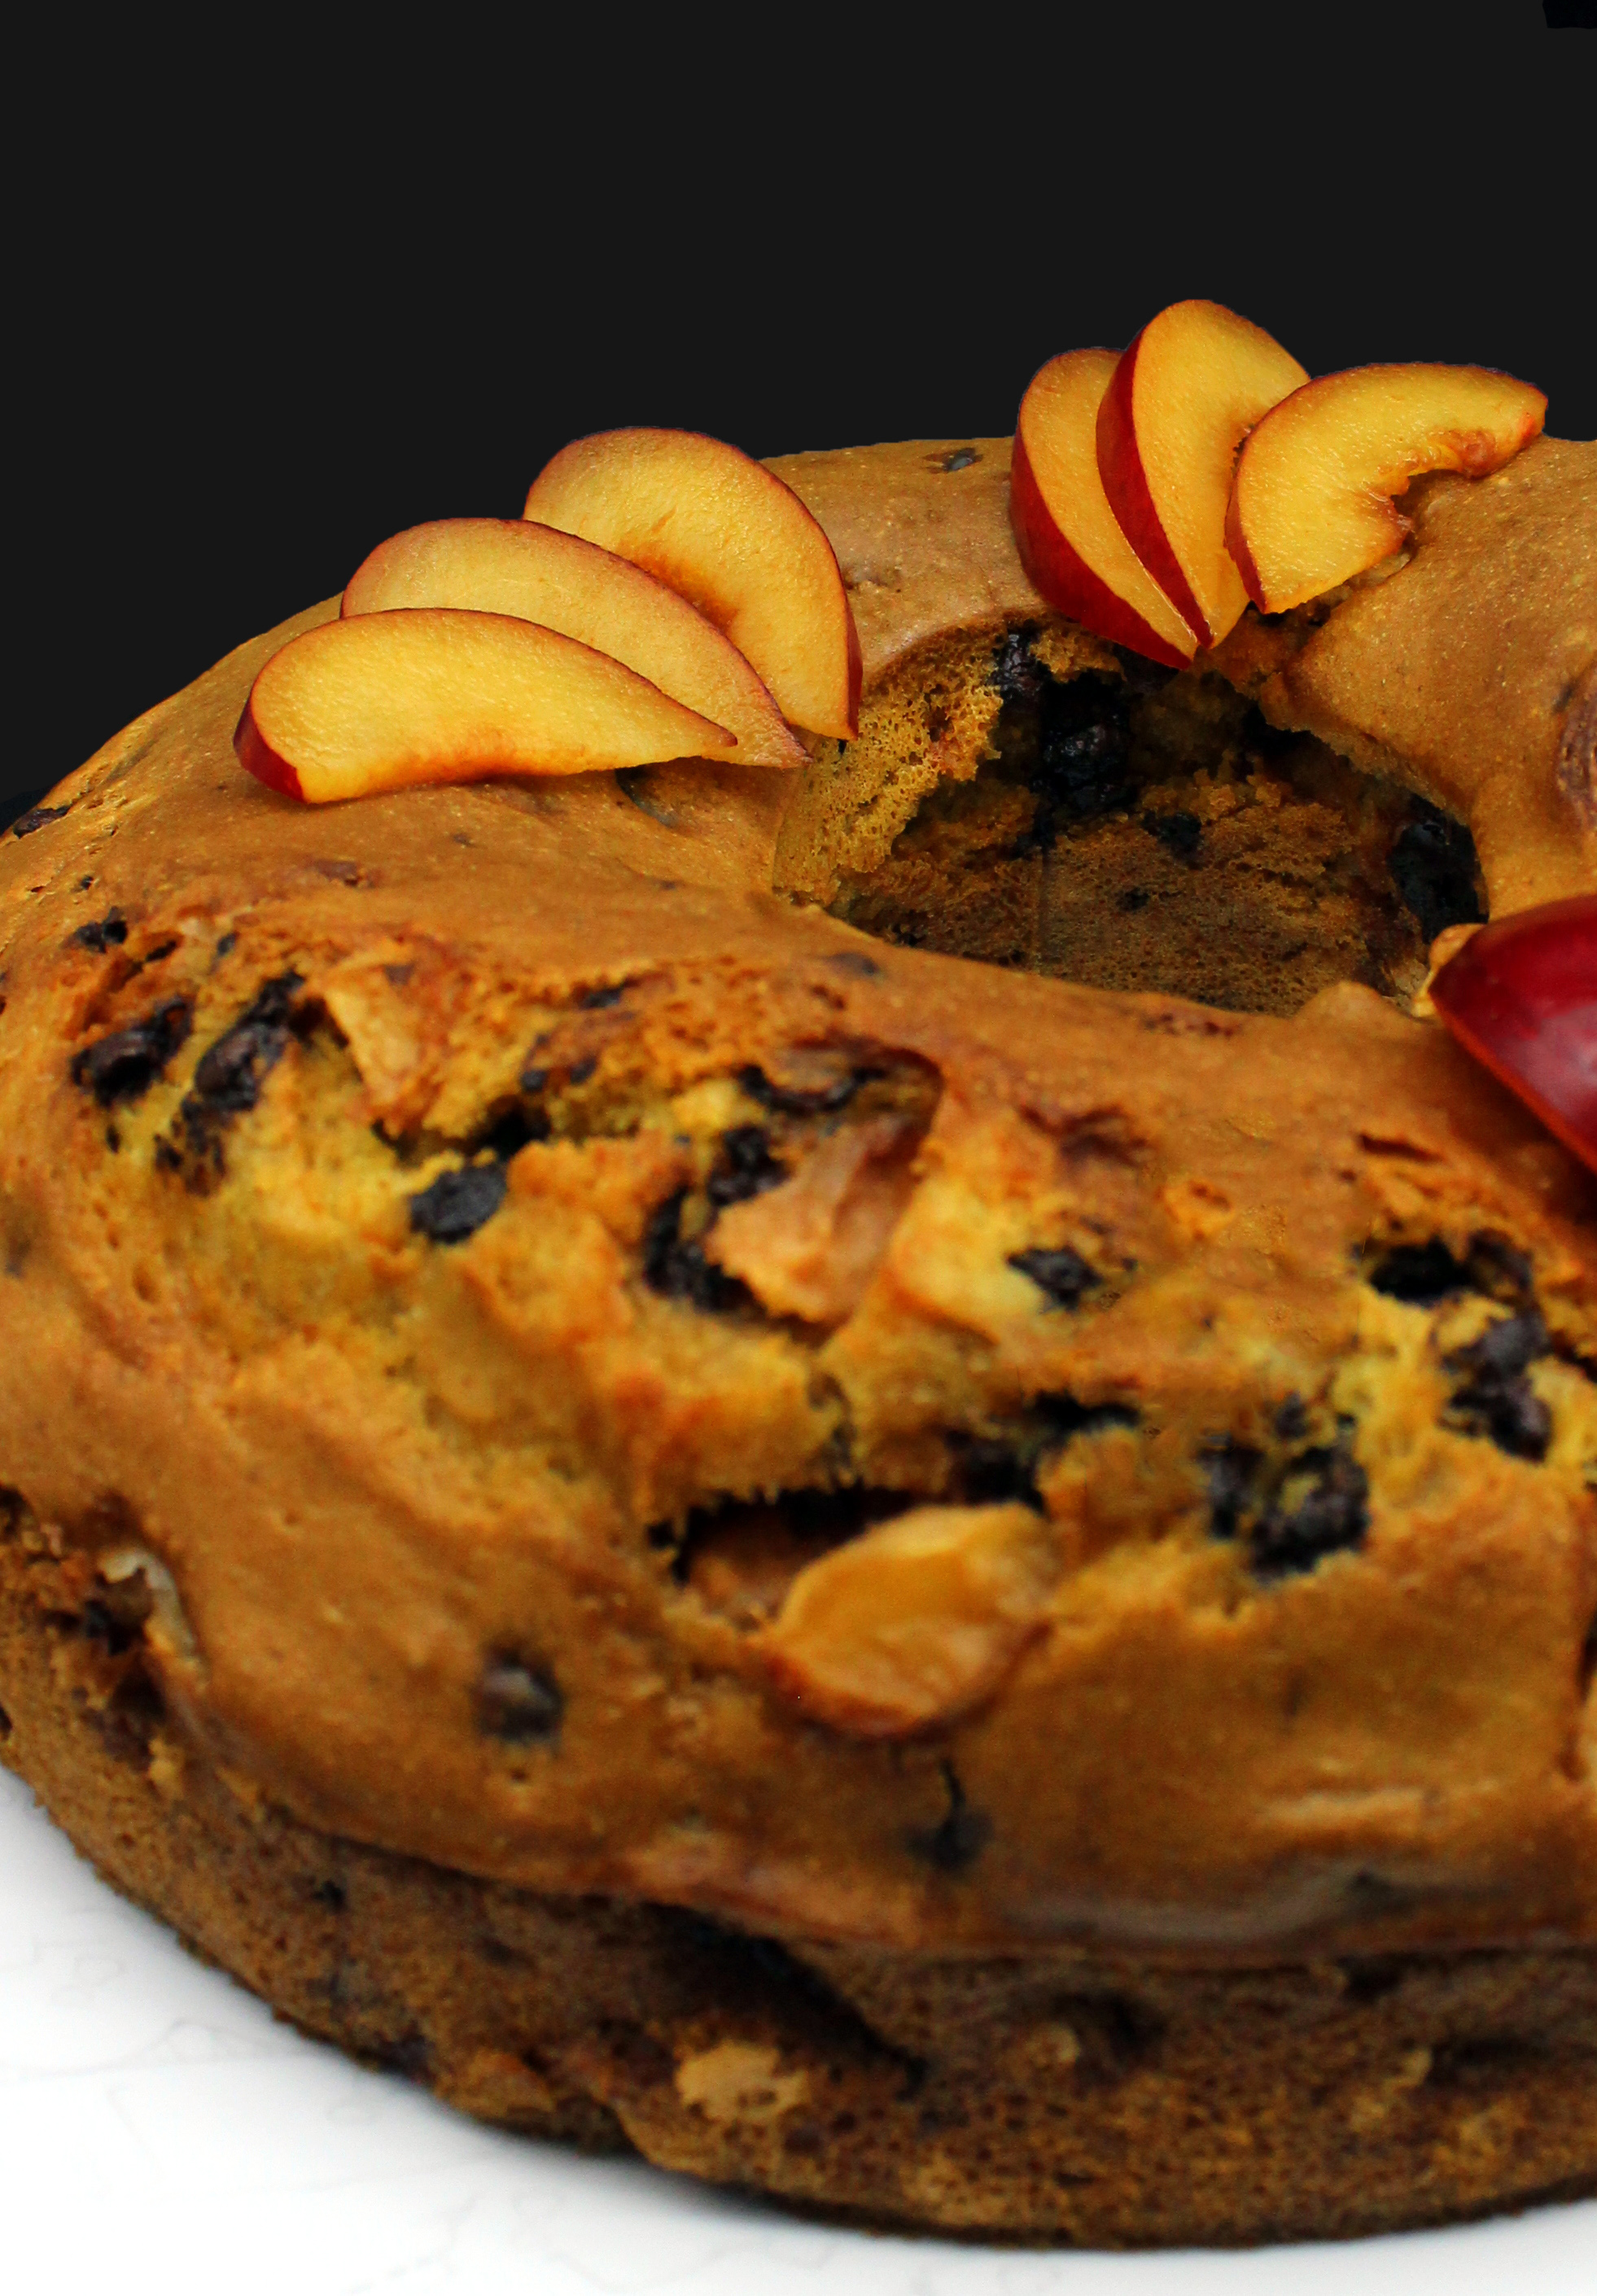 Vegan bundt cake with plums and chocolate chips in closeup